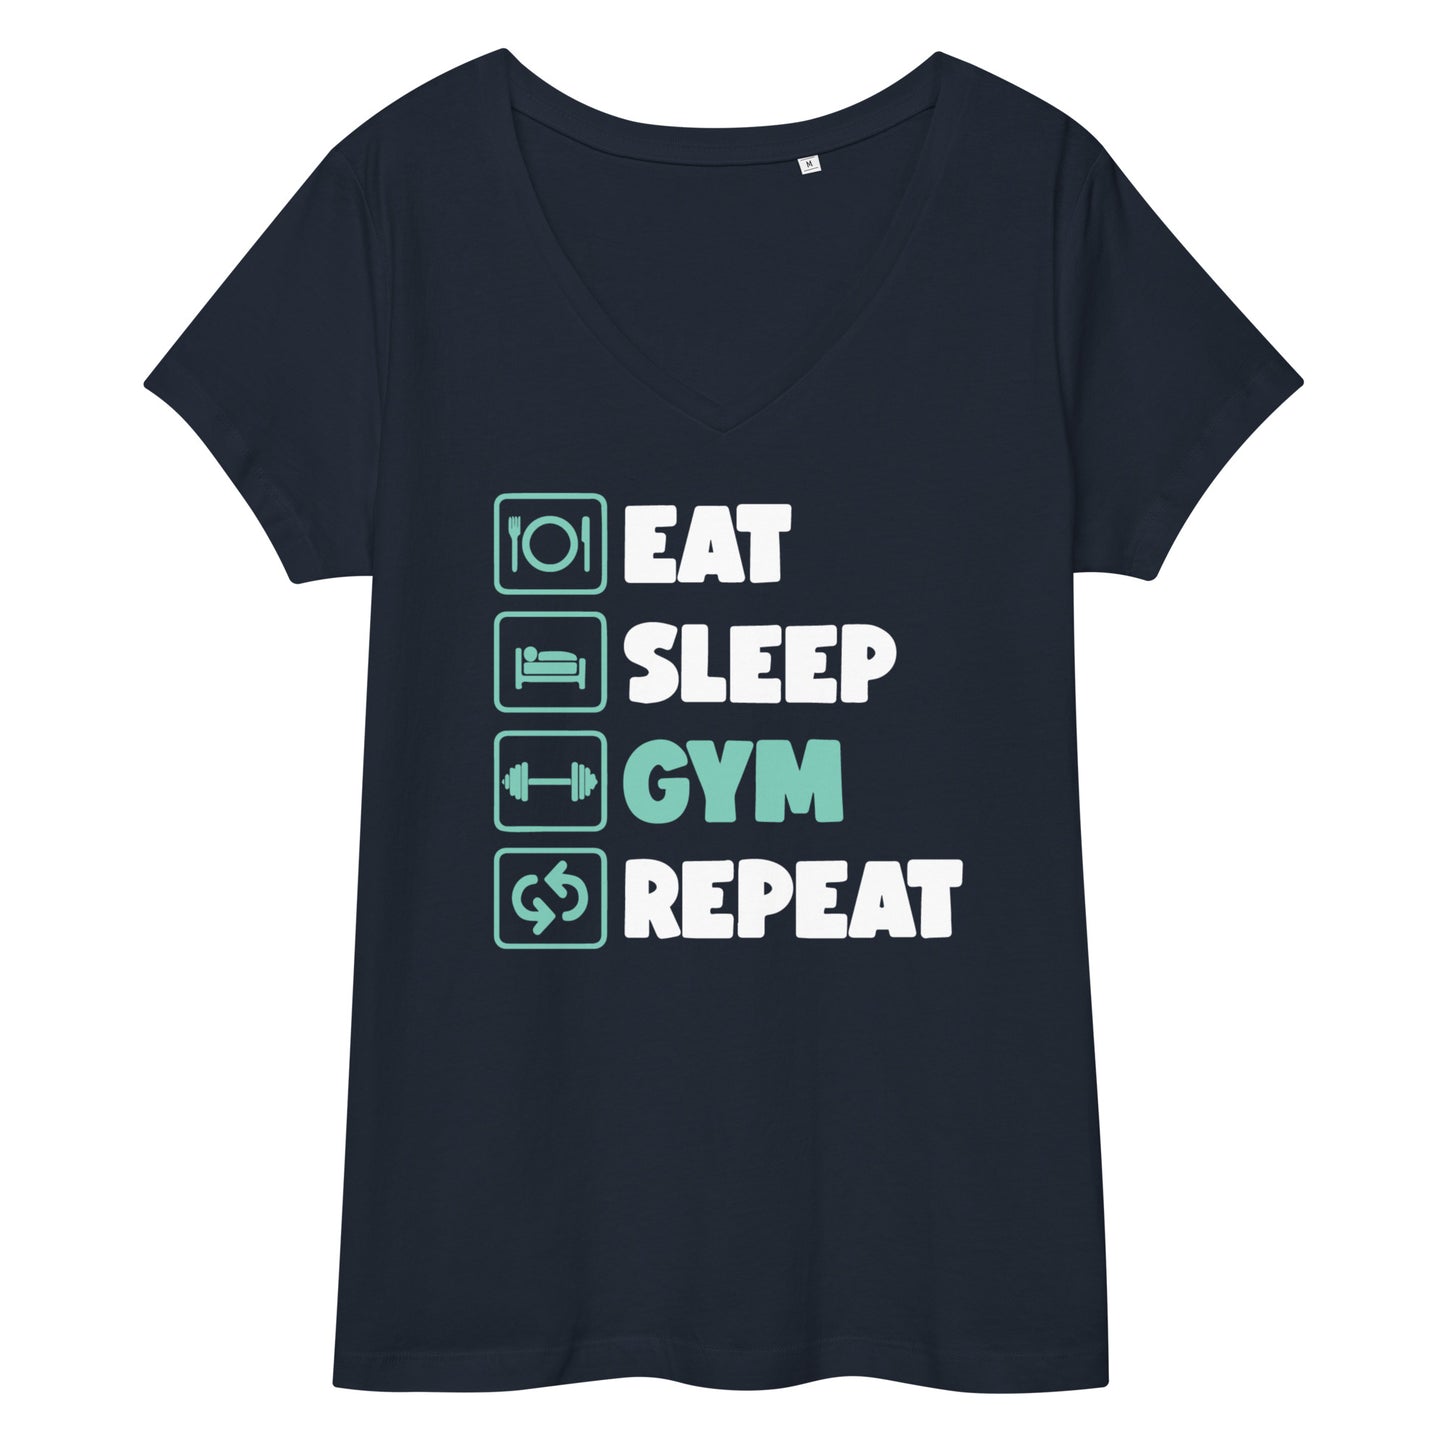 East Sleep Gym Repeat Women’s v-neck Tee The Workout Inspiration